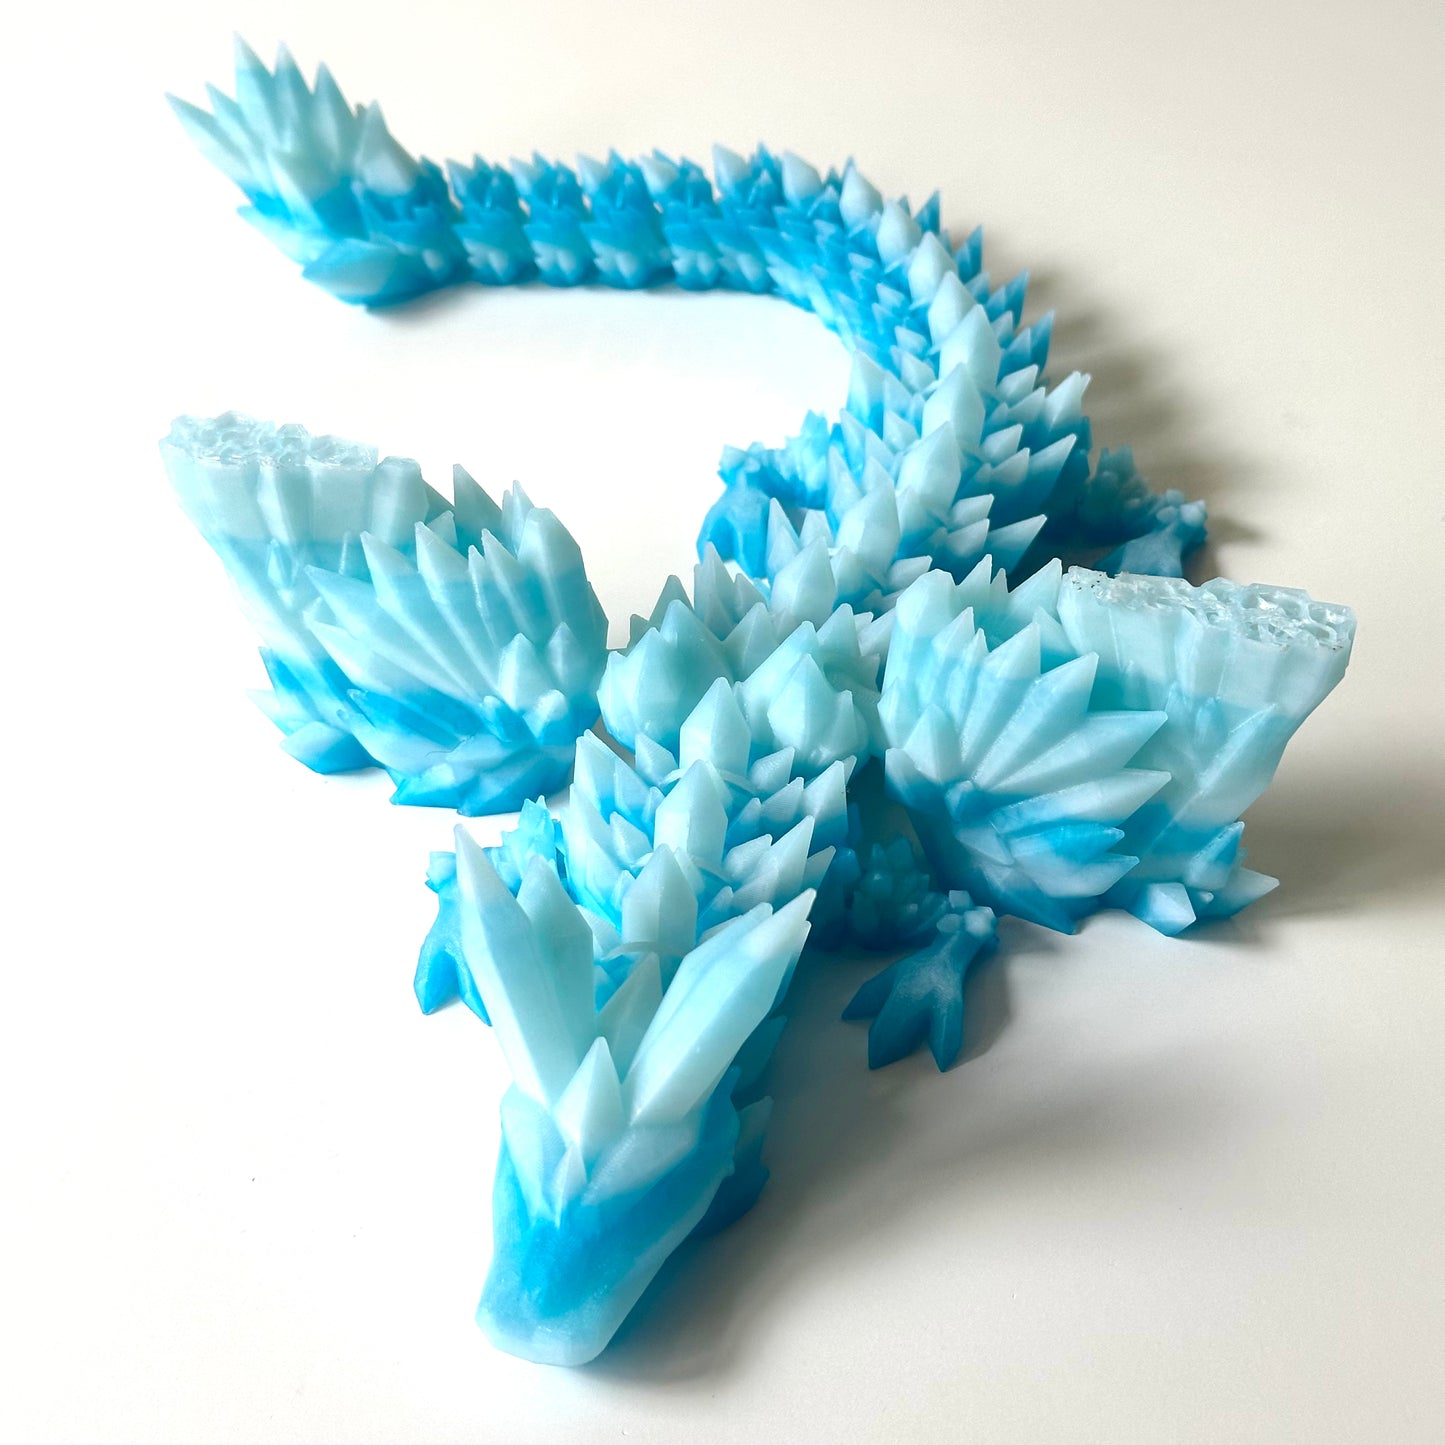 Large Crystal Wing Dragon - 3D Printed Articulating Figure